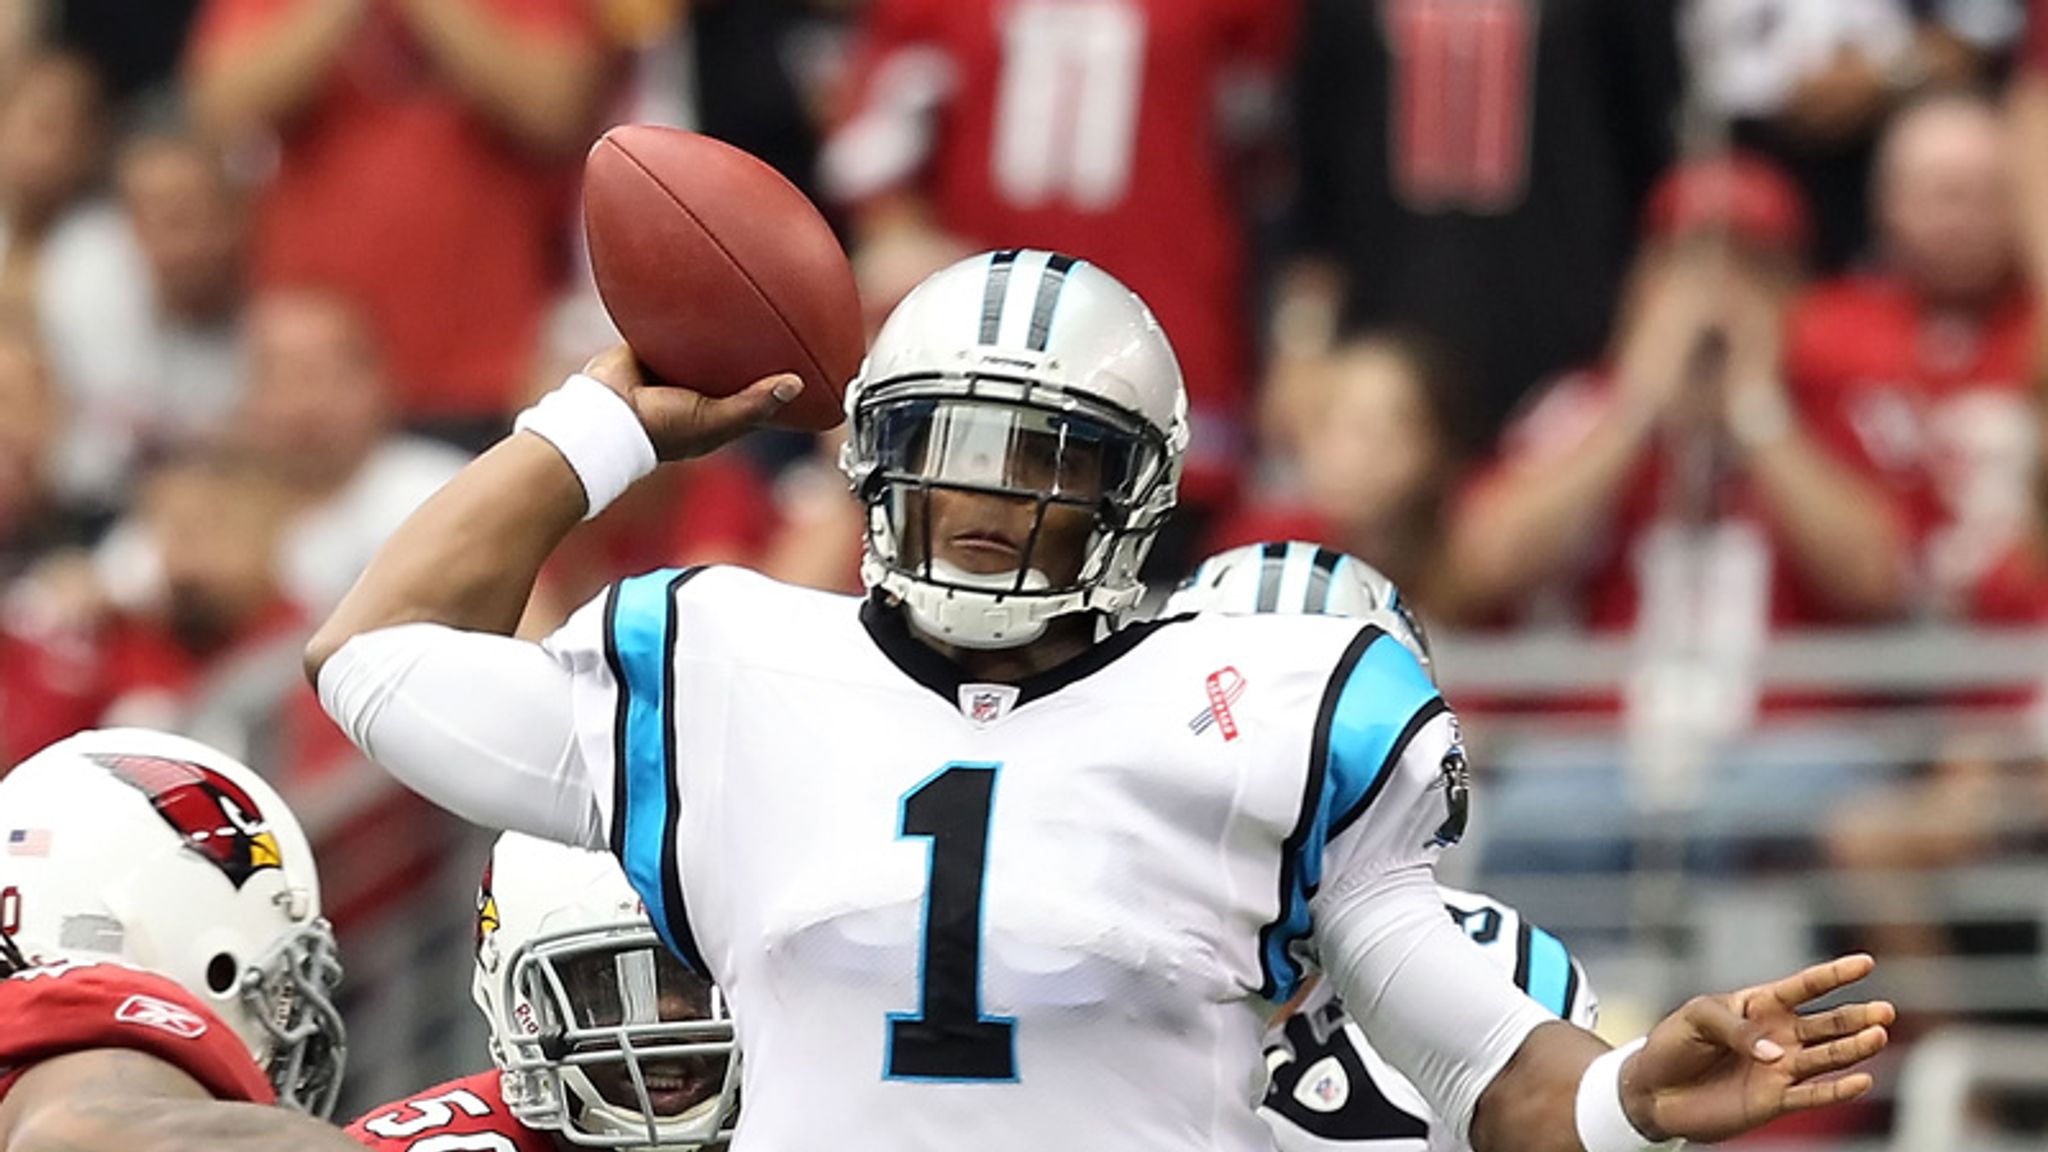 Panthers' Cam Newton in 'super' form in win vs. Lions